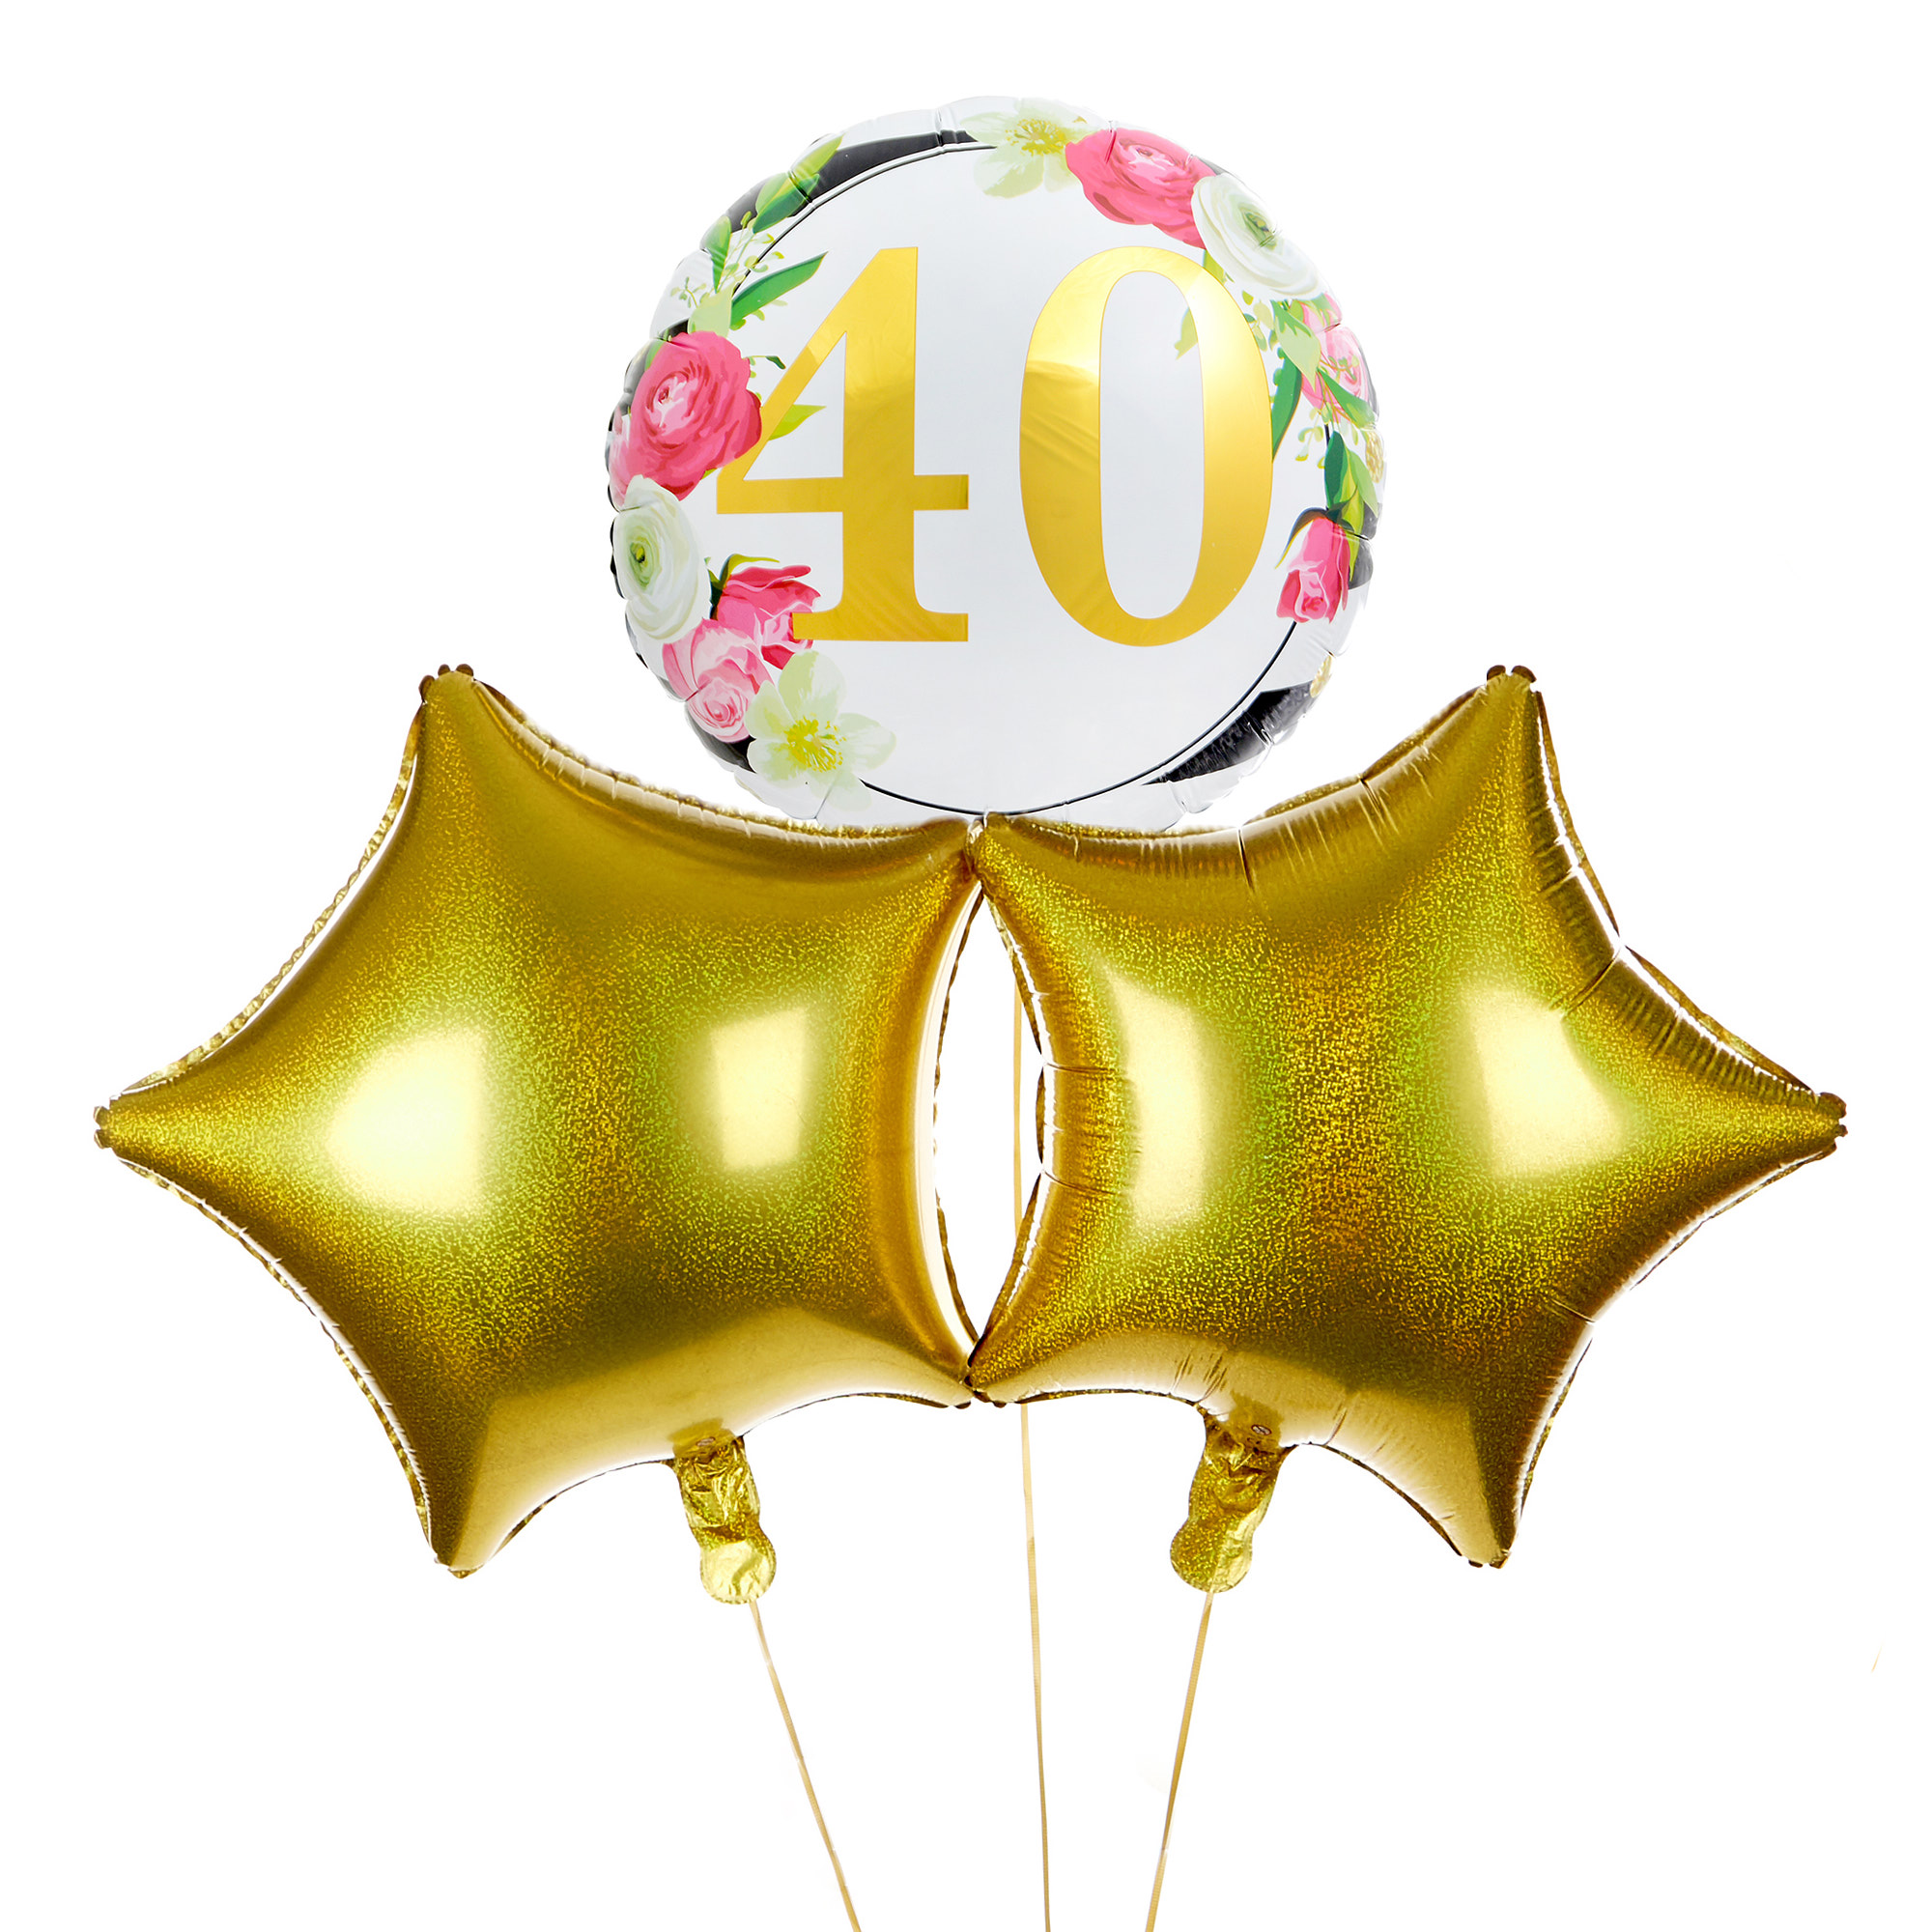 Floral 40th Birthday Balloon Bouquet - DELIVERED INFLATED!